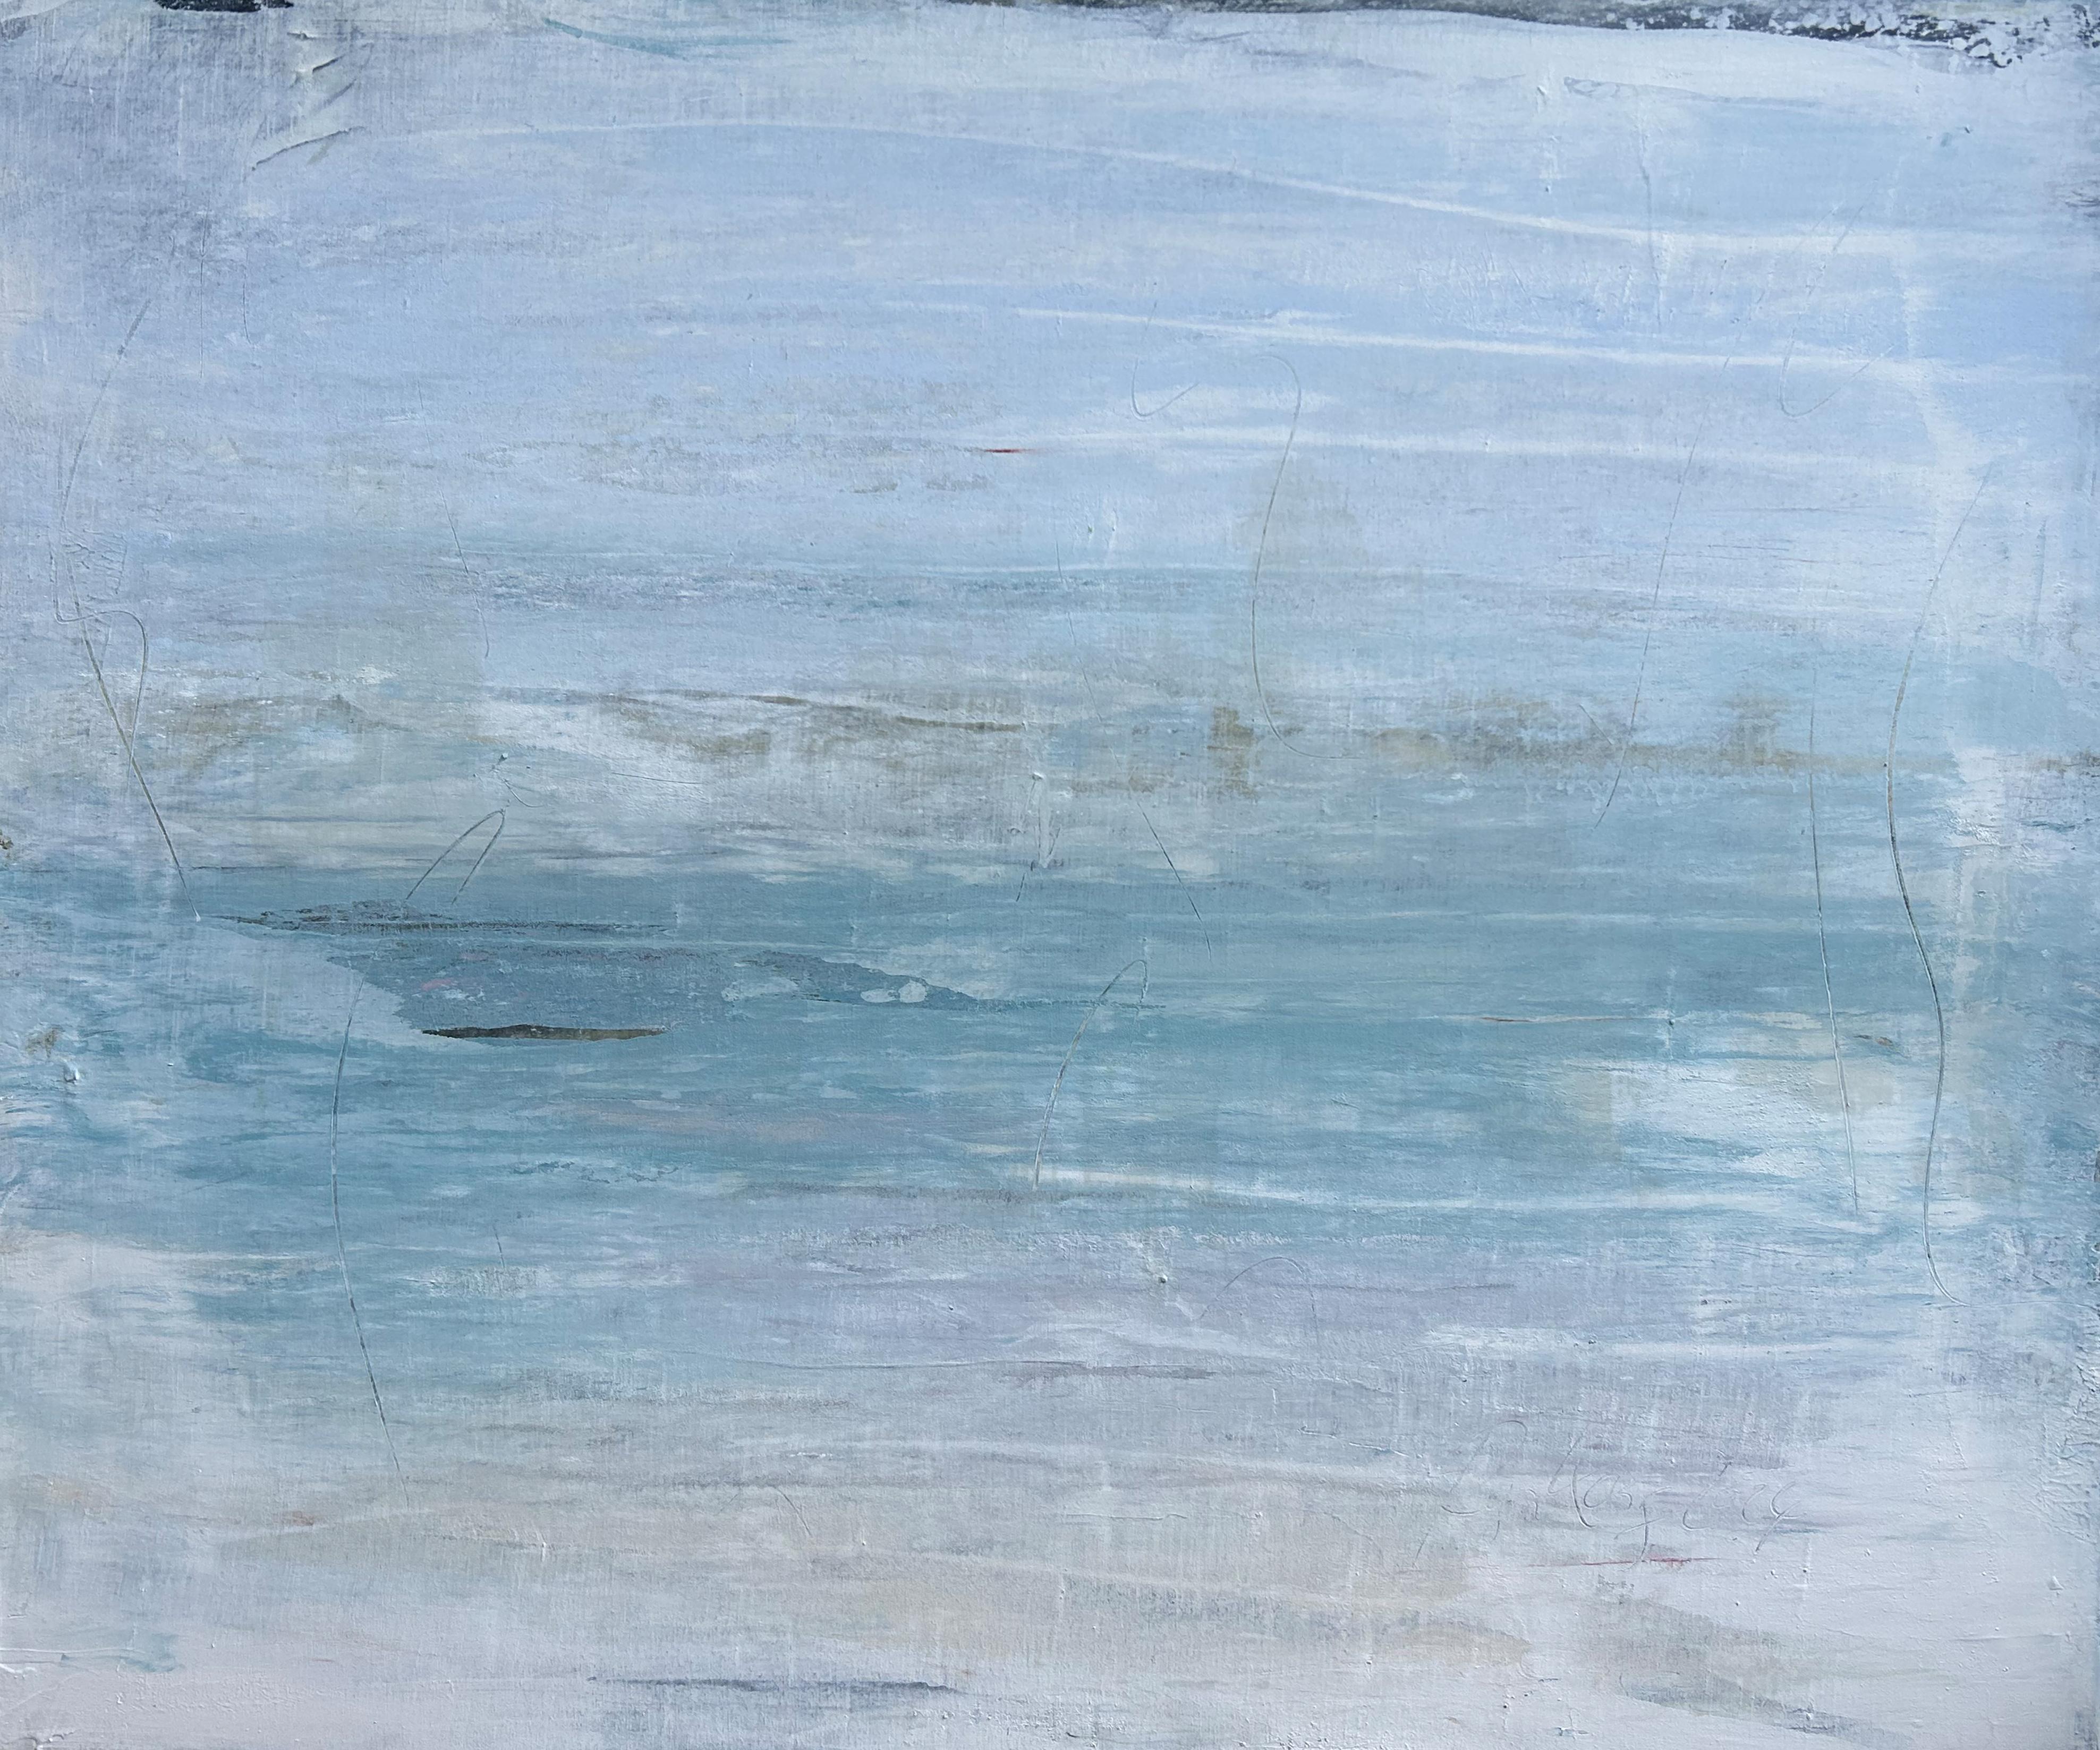 Roger König Landscape Painting - "Seascape Series", RK2L4, Abstract, Painting, 21st Century, Acryl and Clay